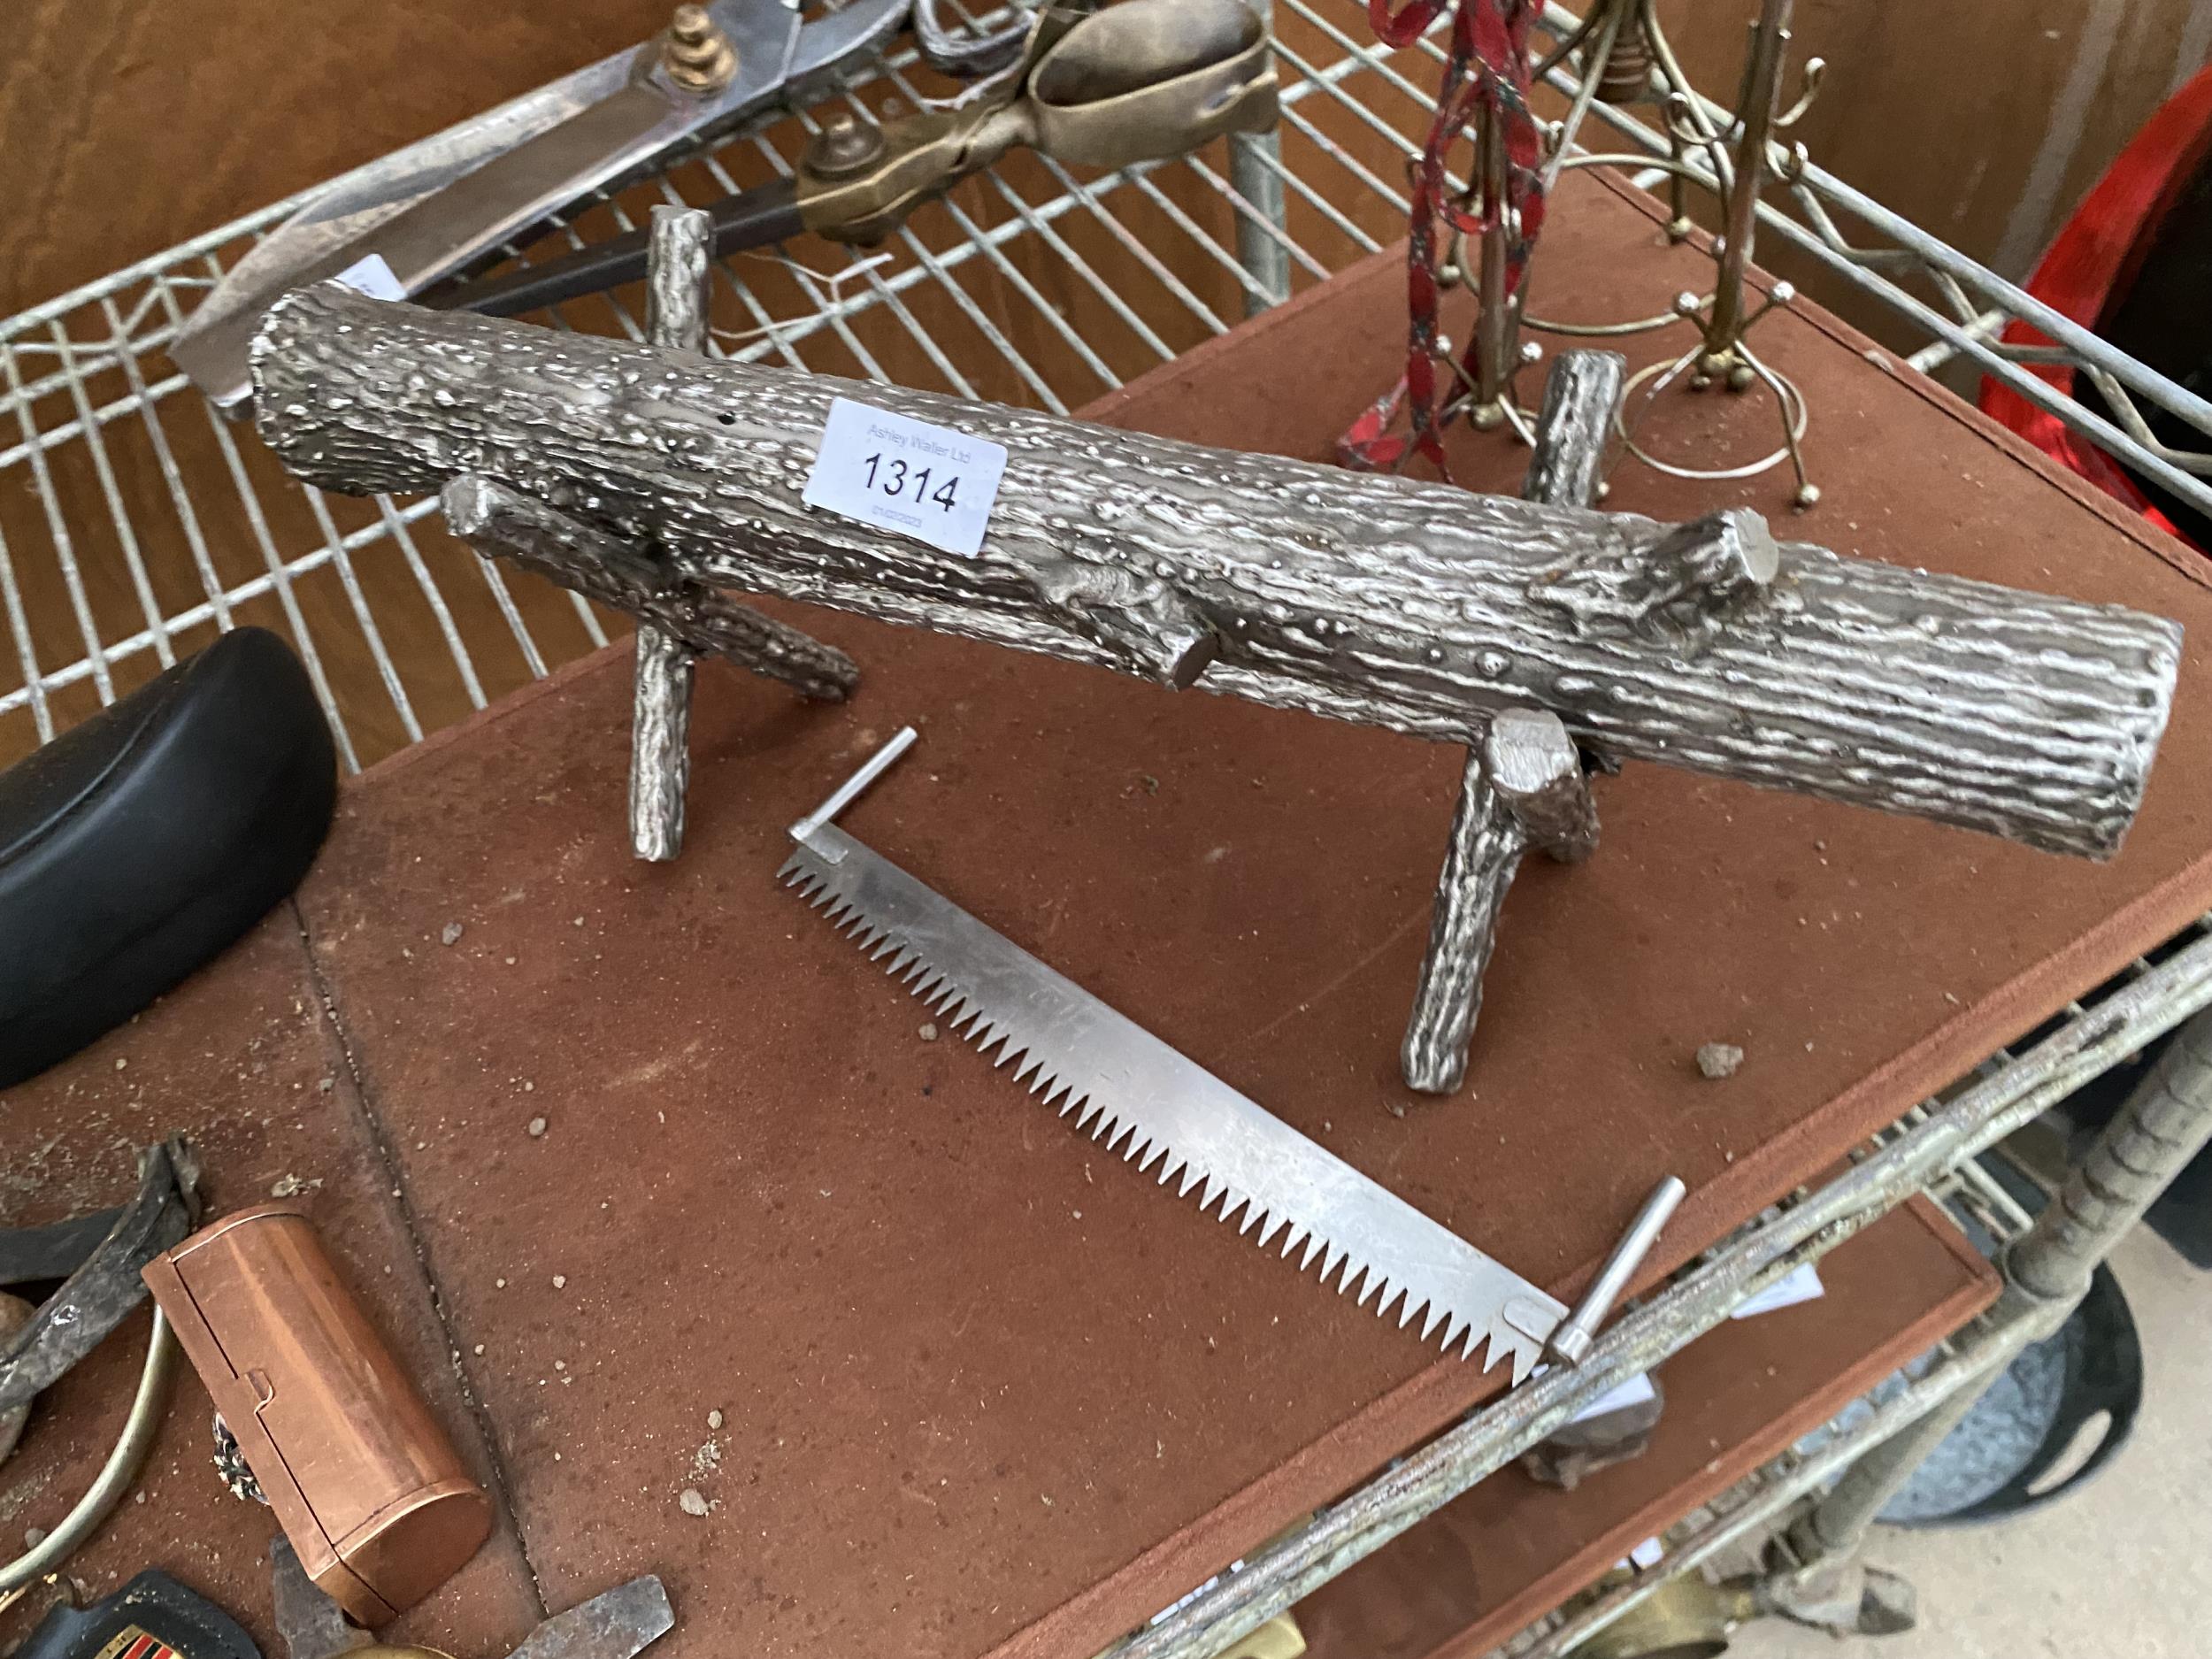 A MINITURE SILVER PLATED LOG STAND, LOG AND CROSS CUT SAW